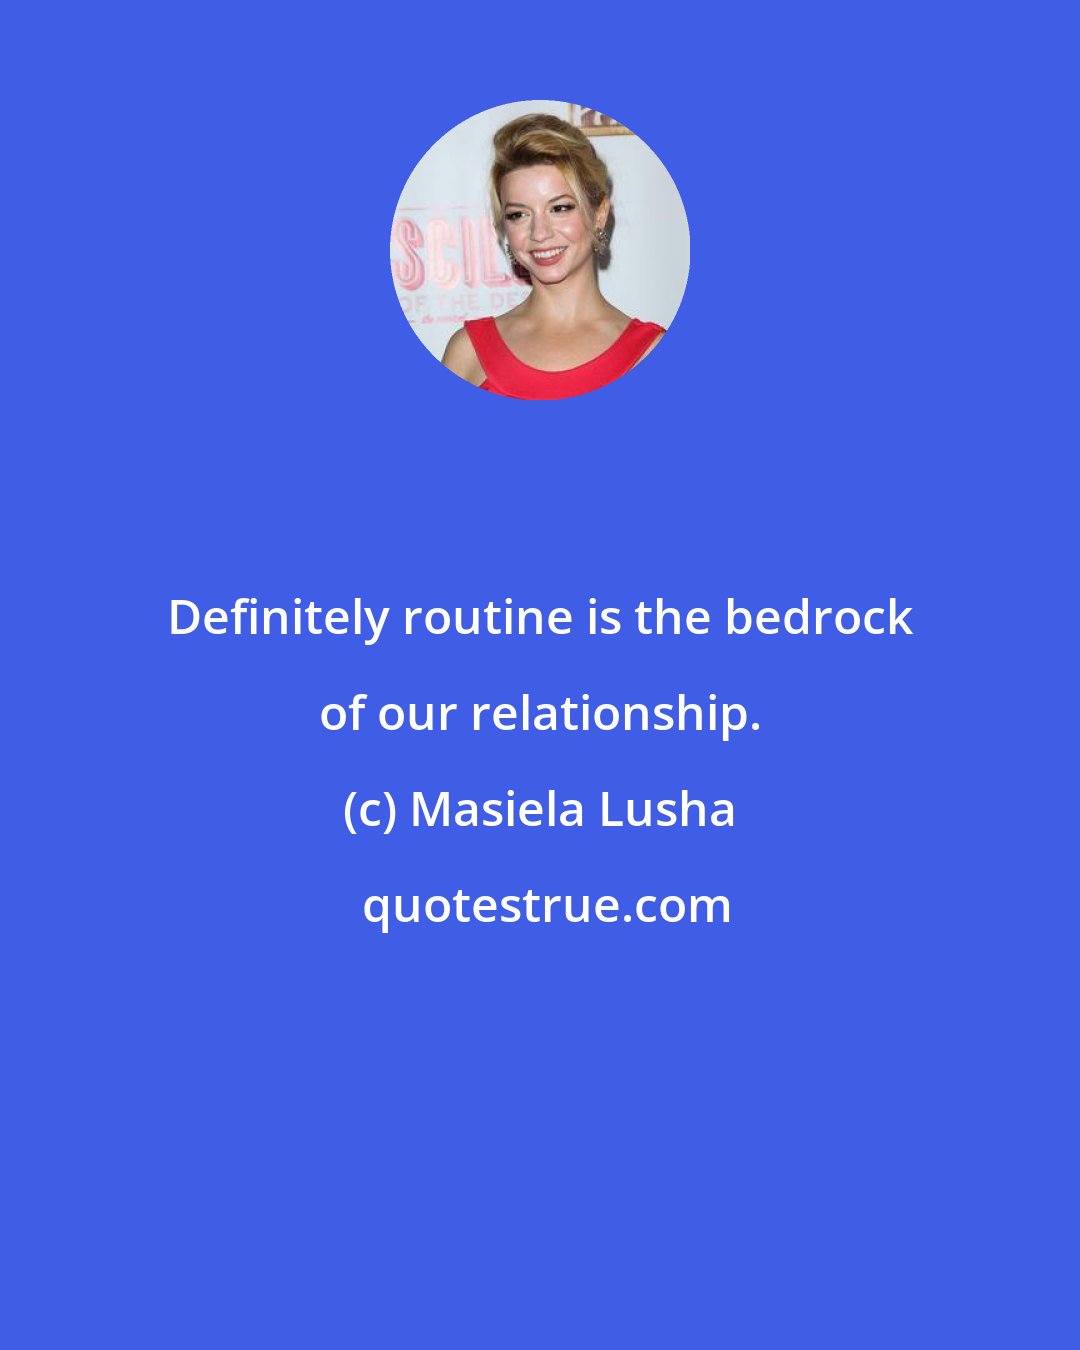 Masiela Lusha: Definitely routine is the bedrock of our relationship.